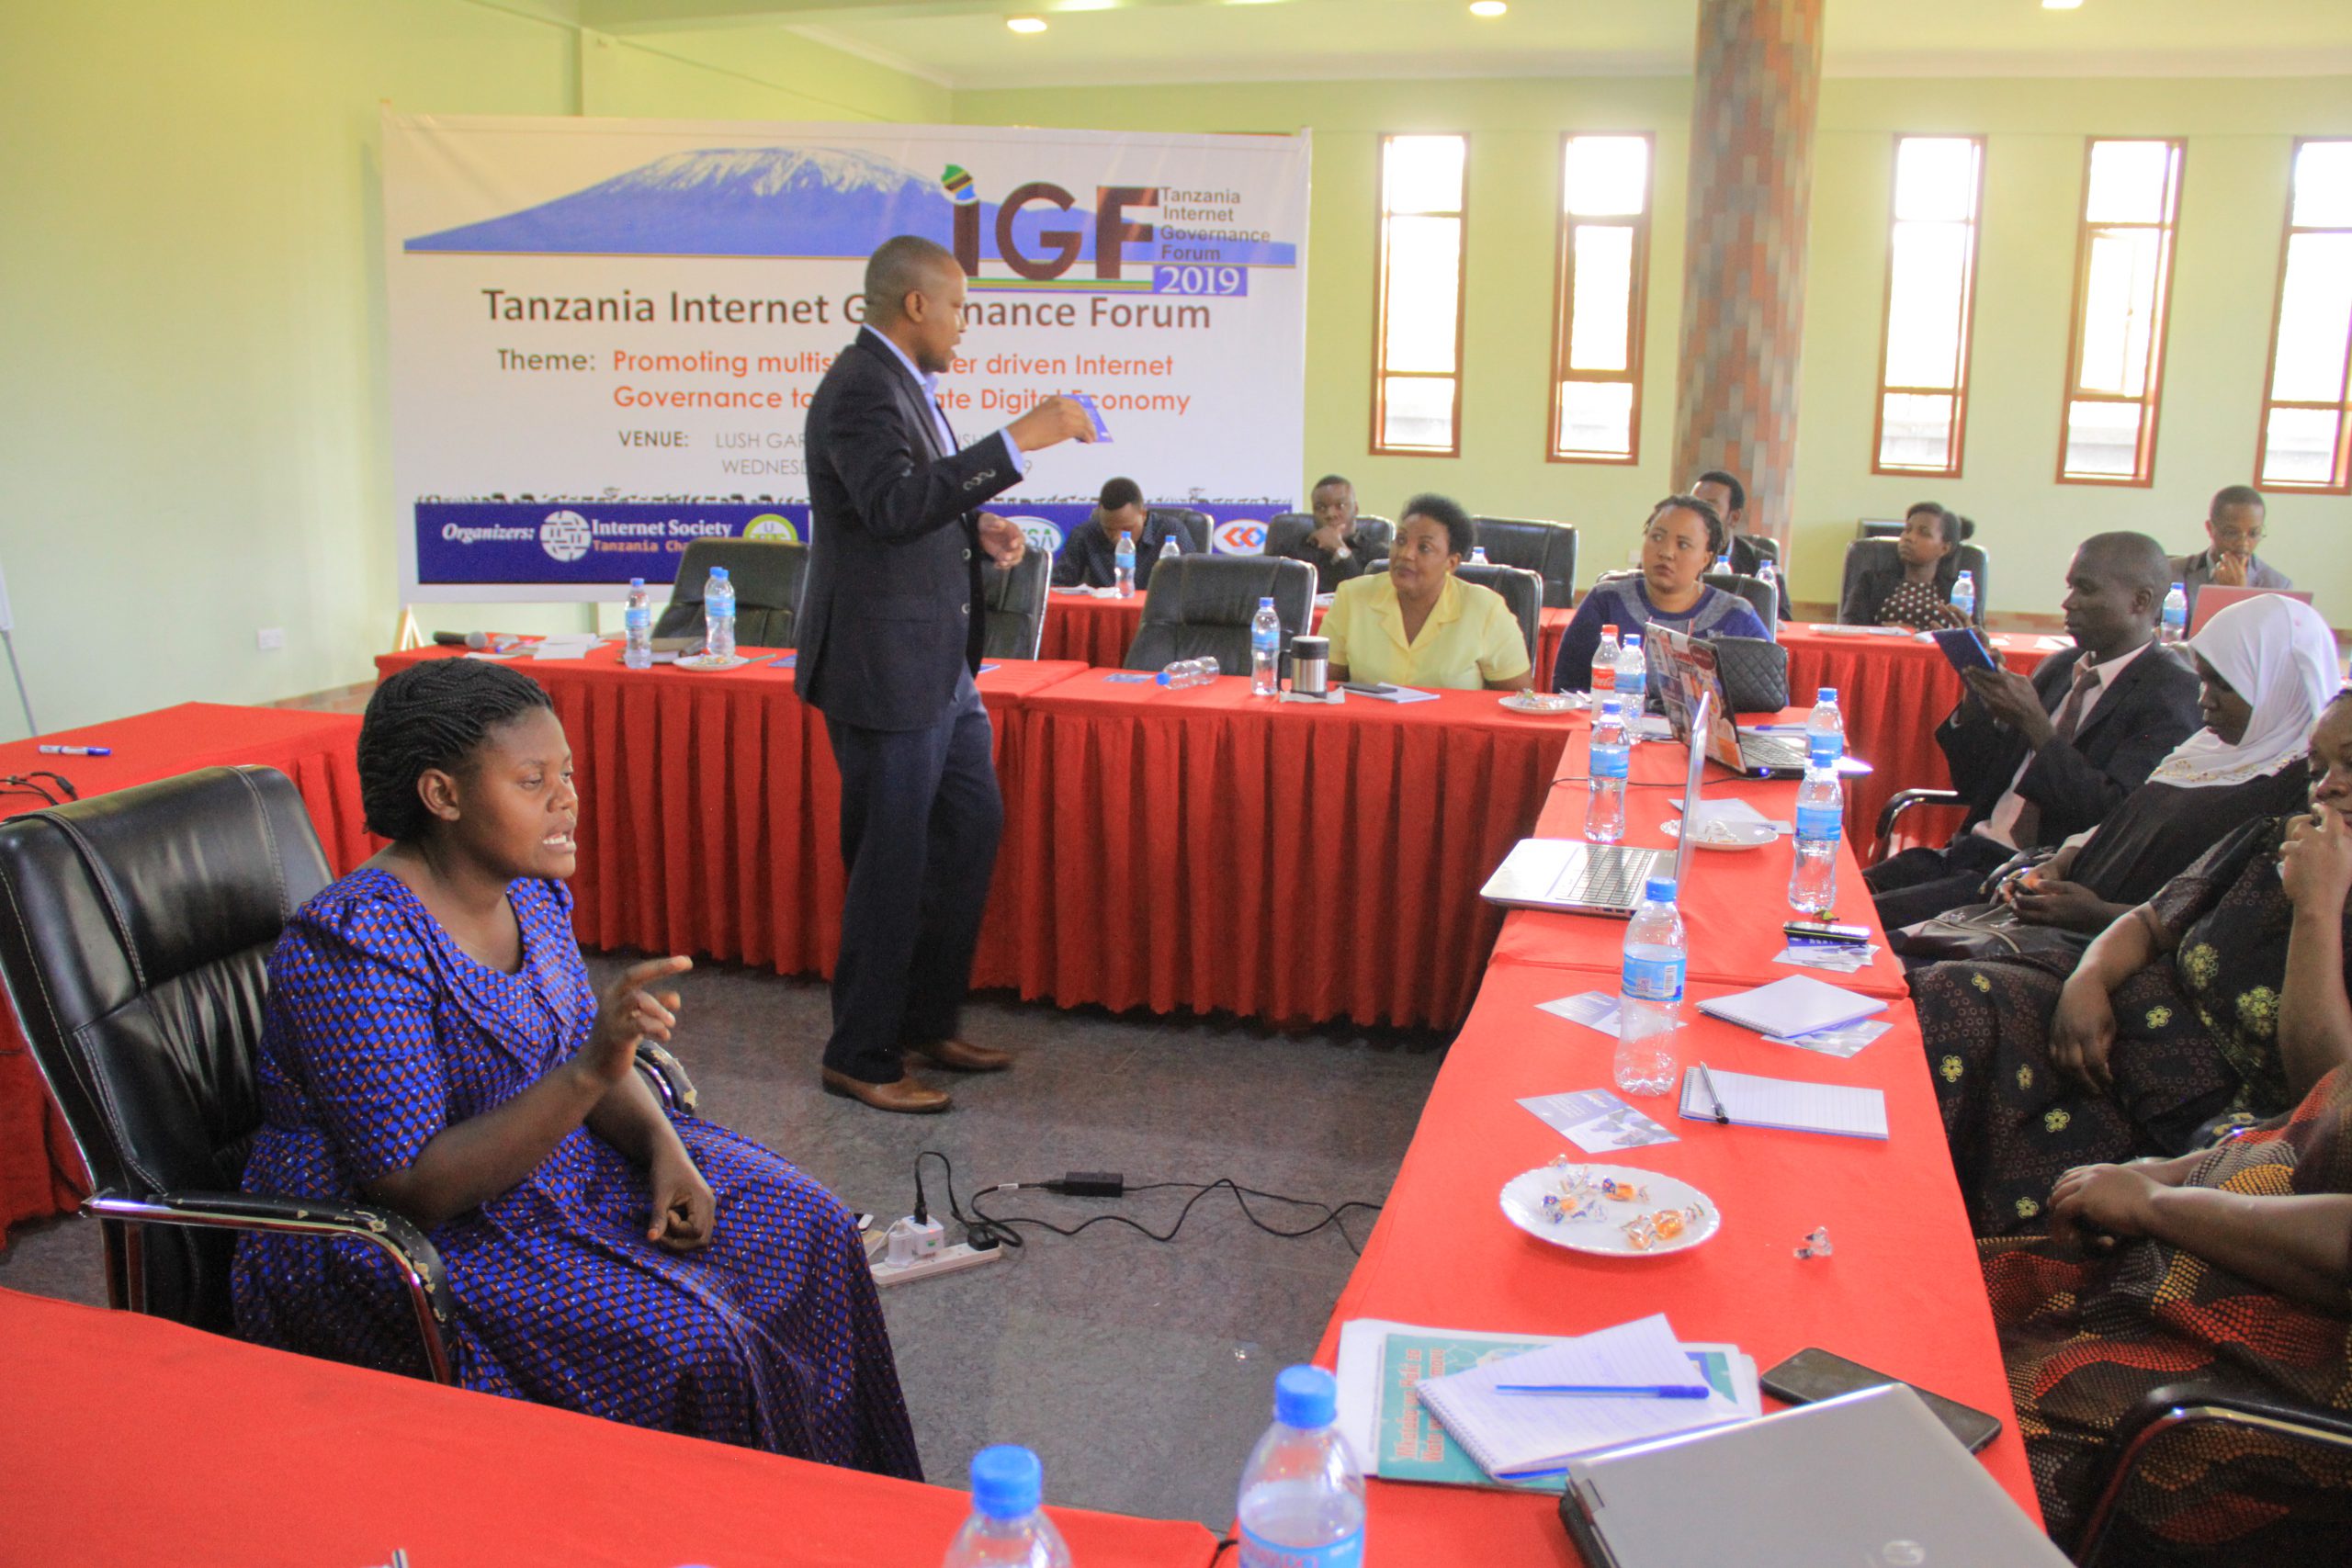 Call-for-Volunteeers-for-the-2019-Tanzania-IGF-MAG